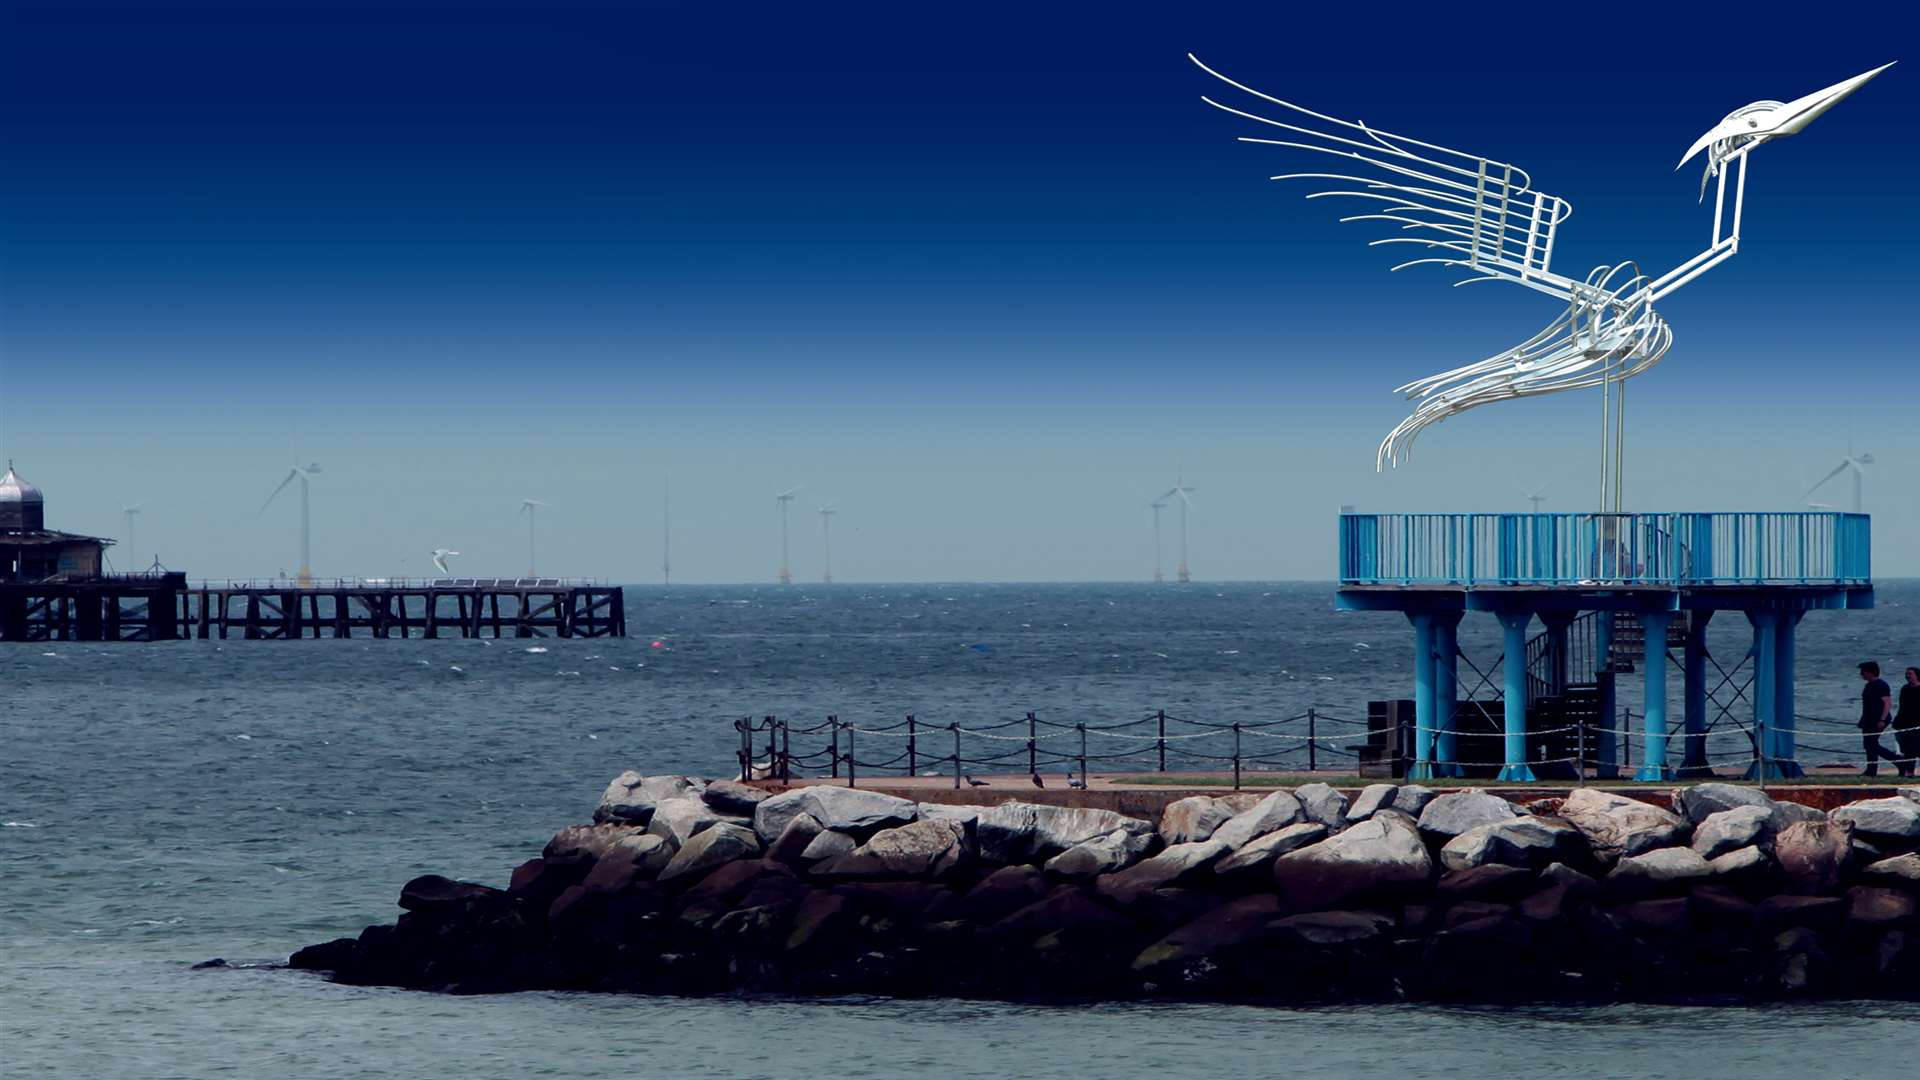 Plans for a new heron sculpture on Neptune's Arm